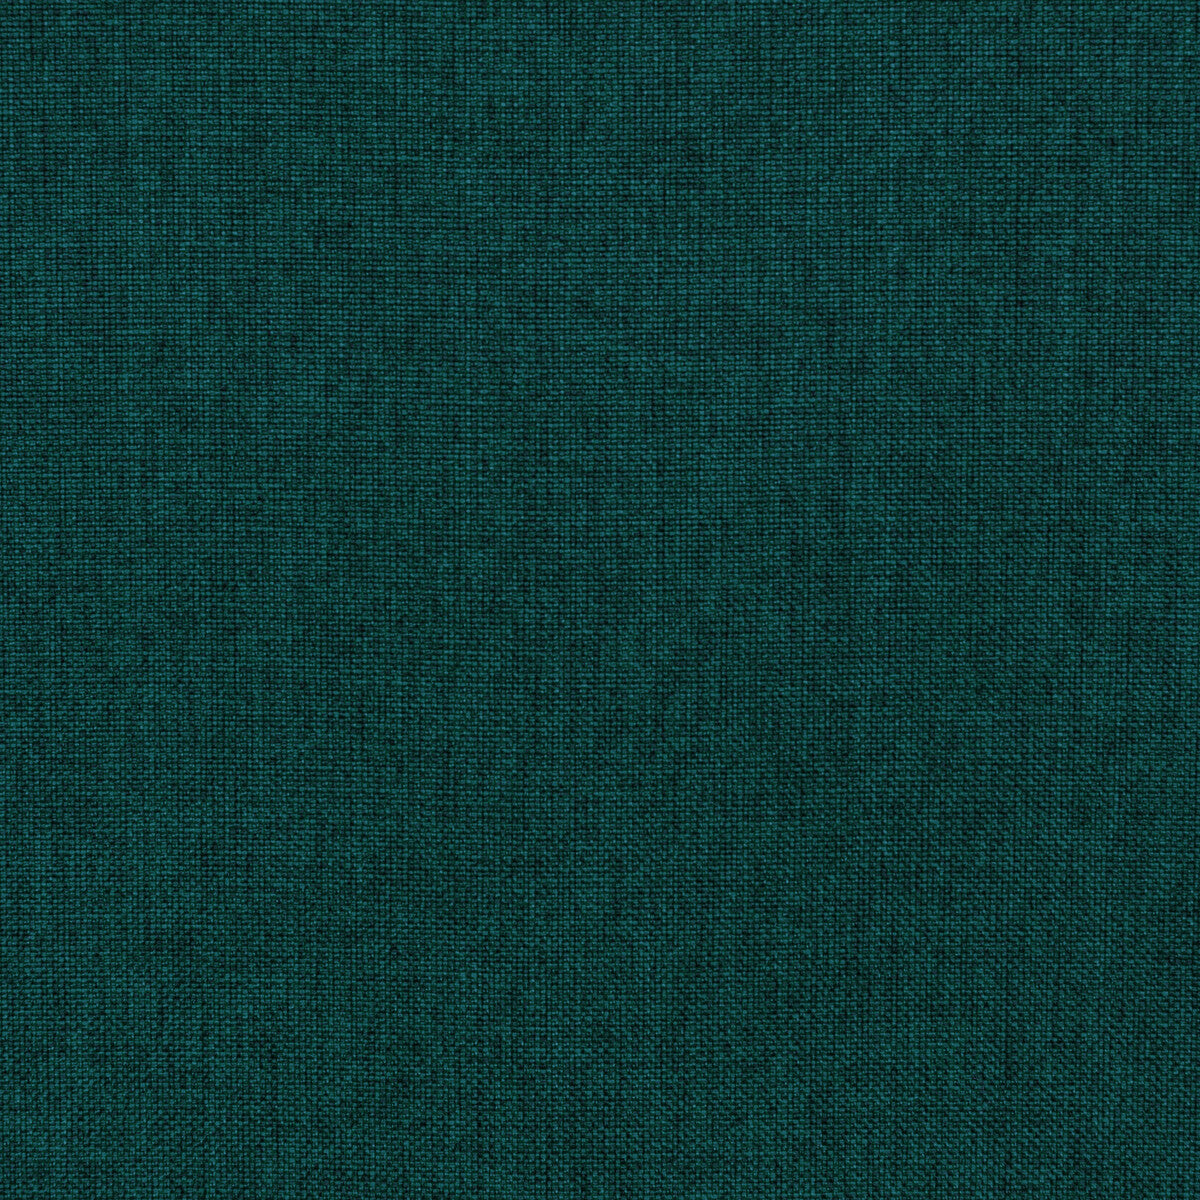 Fortify fabric in mermaid color - pattern 36257.35.0 - by Kravet Contract in the Supreen collection